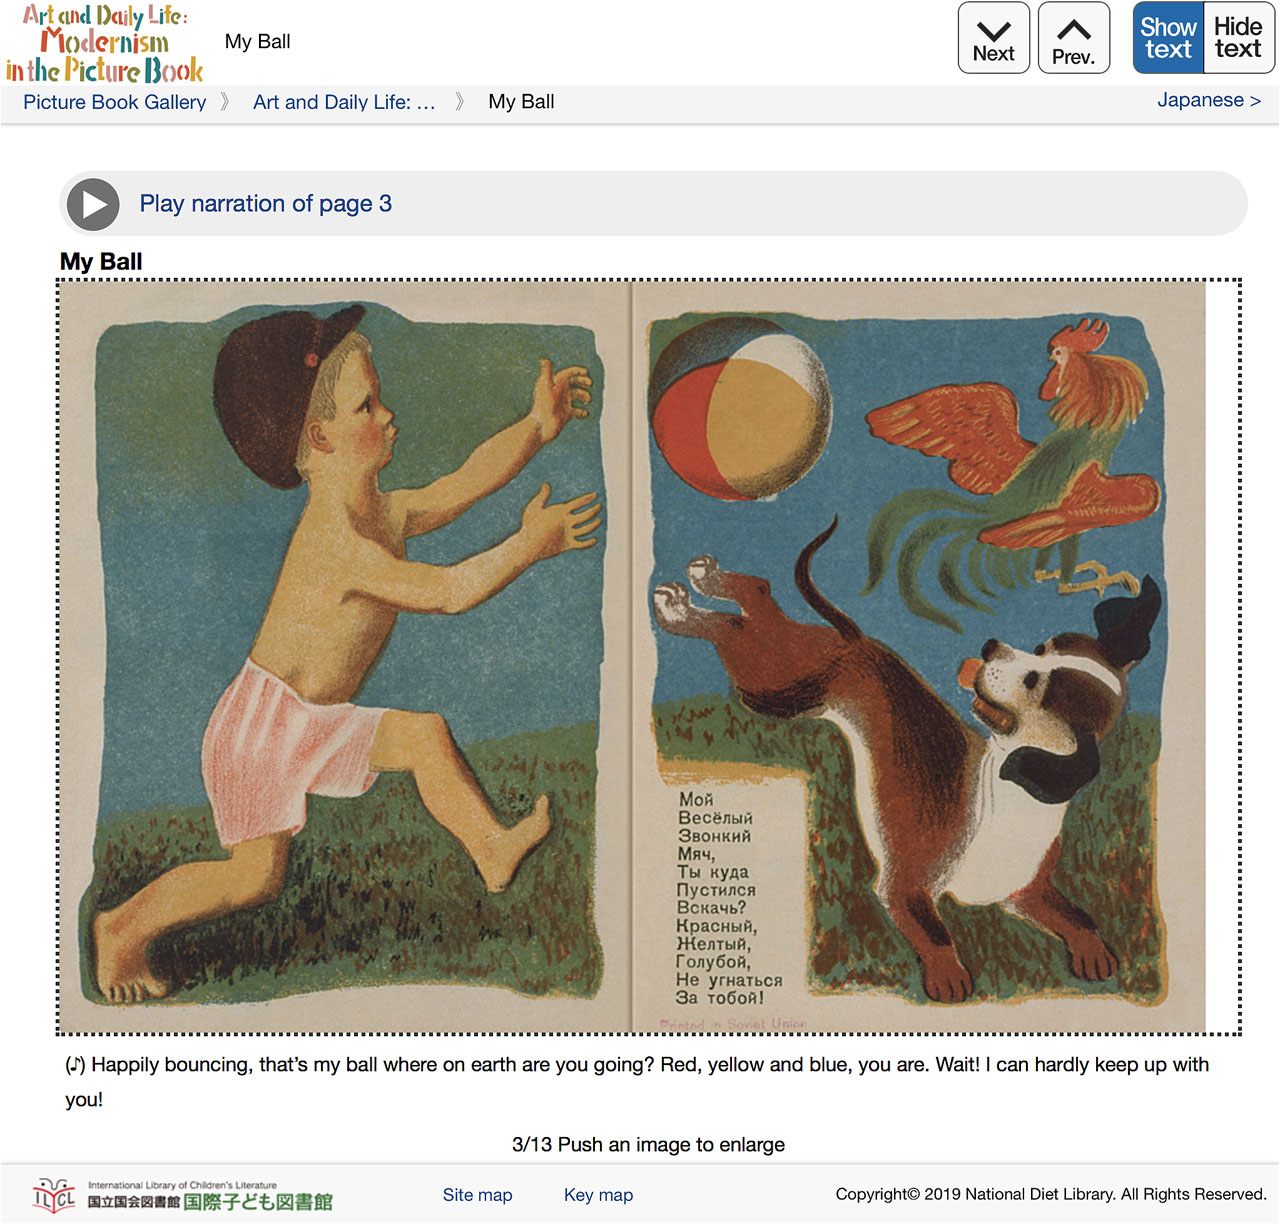 Image of Forcusing to “Play Narration button” or “Picture Book page image”